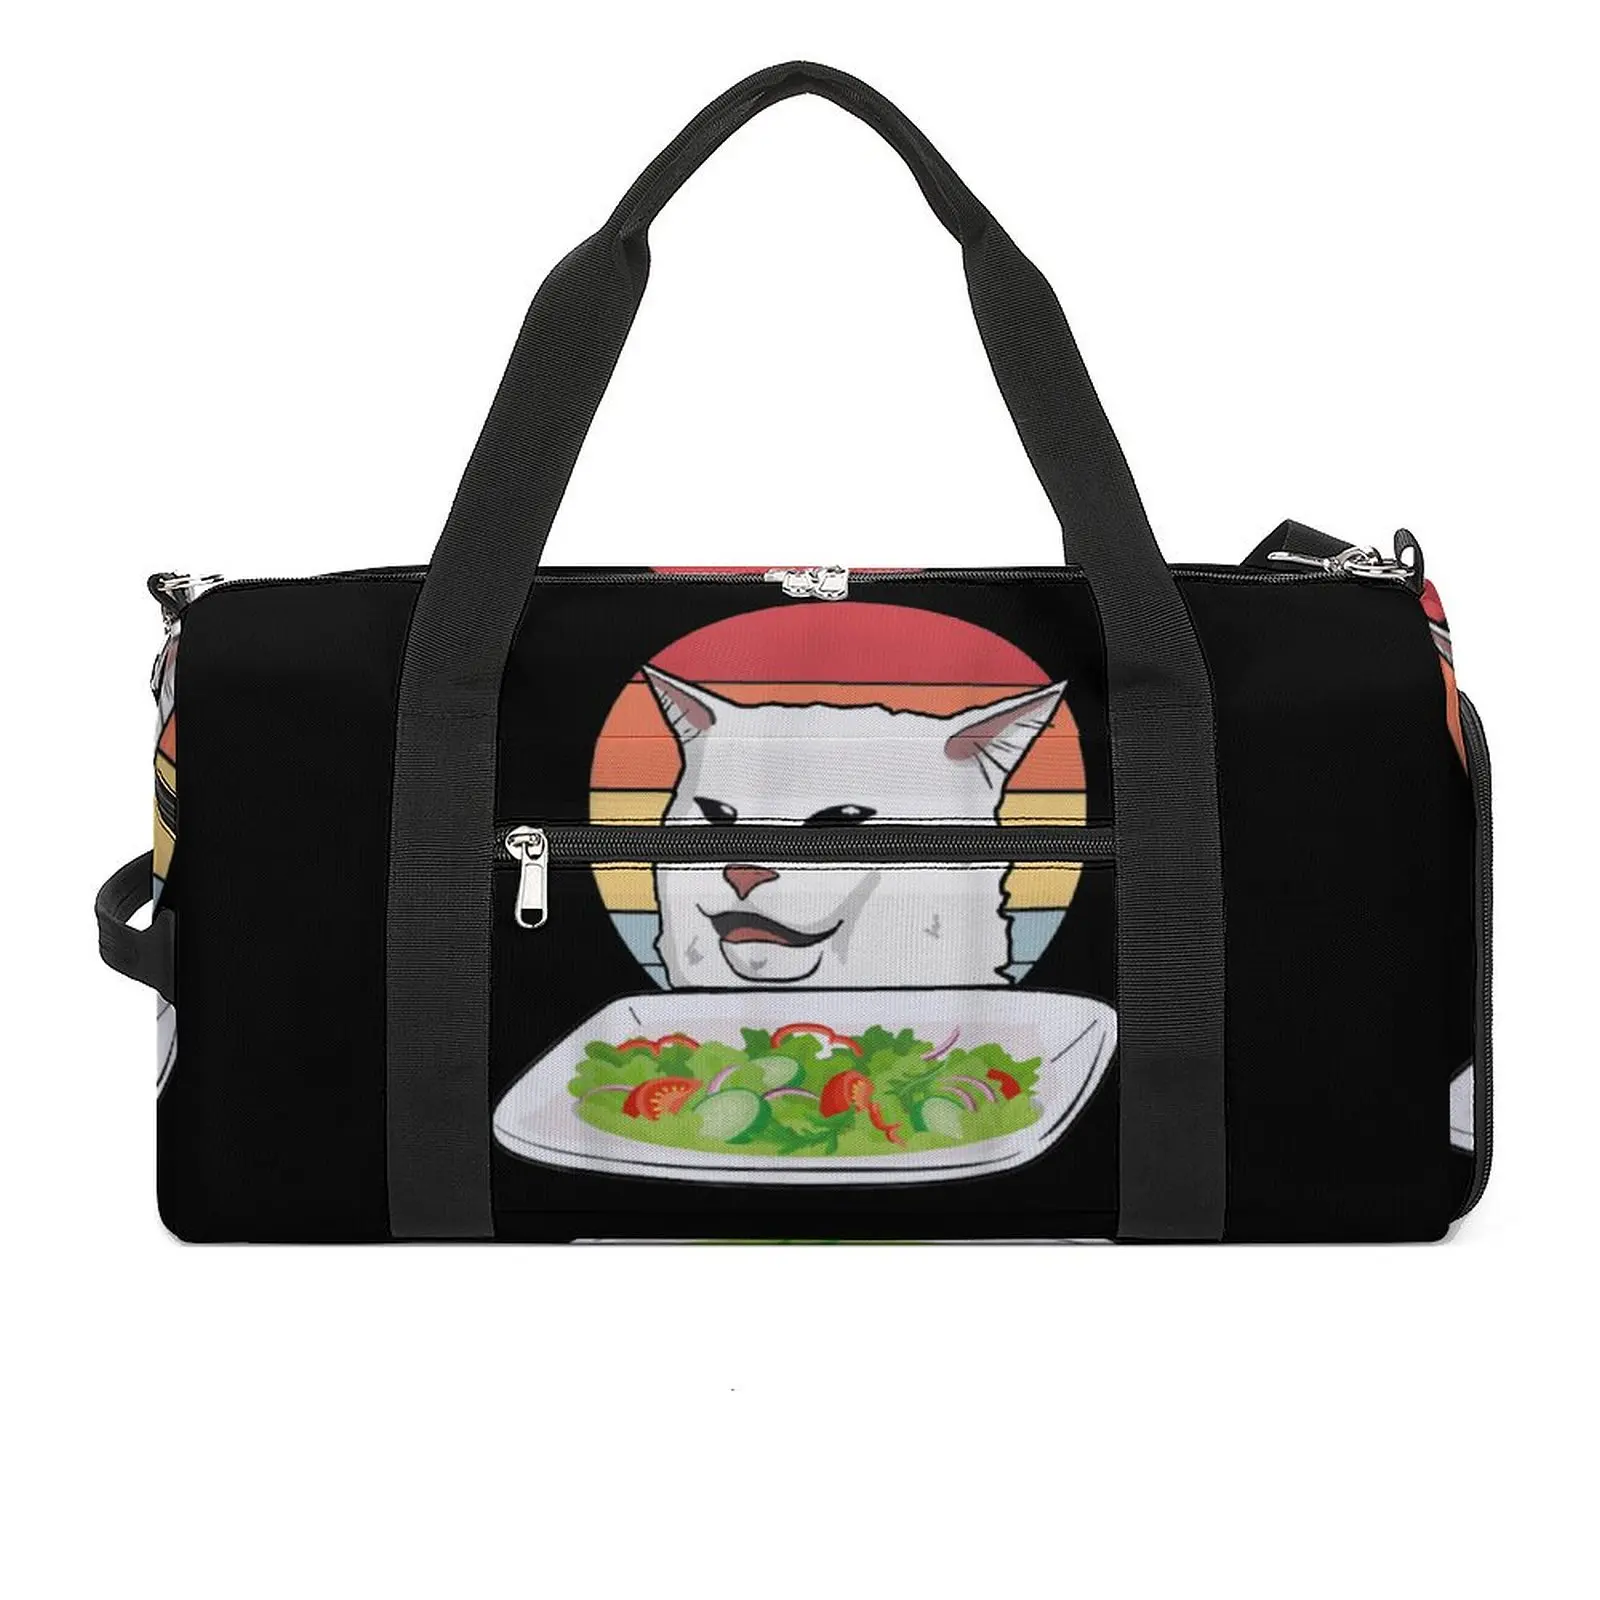 

Angry Women Yelling At Confused Cat At Dinner Table Sport Bags Meme Large Gym Bag Waterproof Couple Handbag Travel Fitness Bag